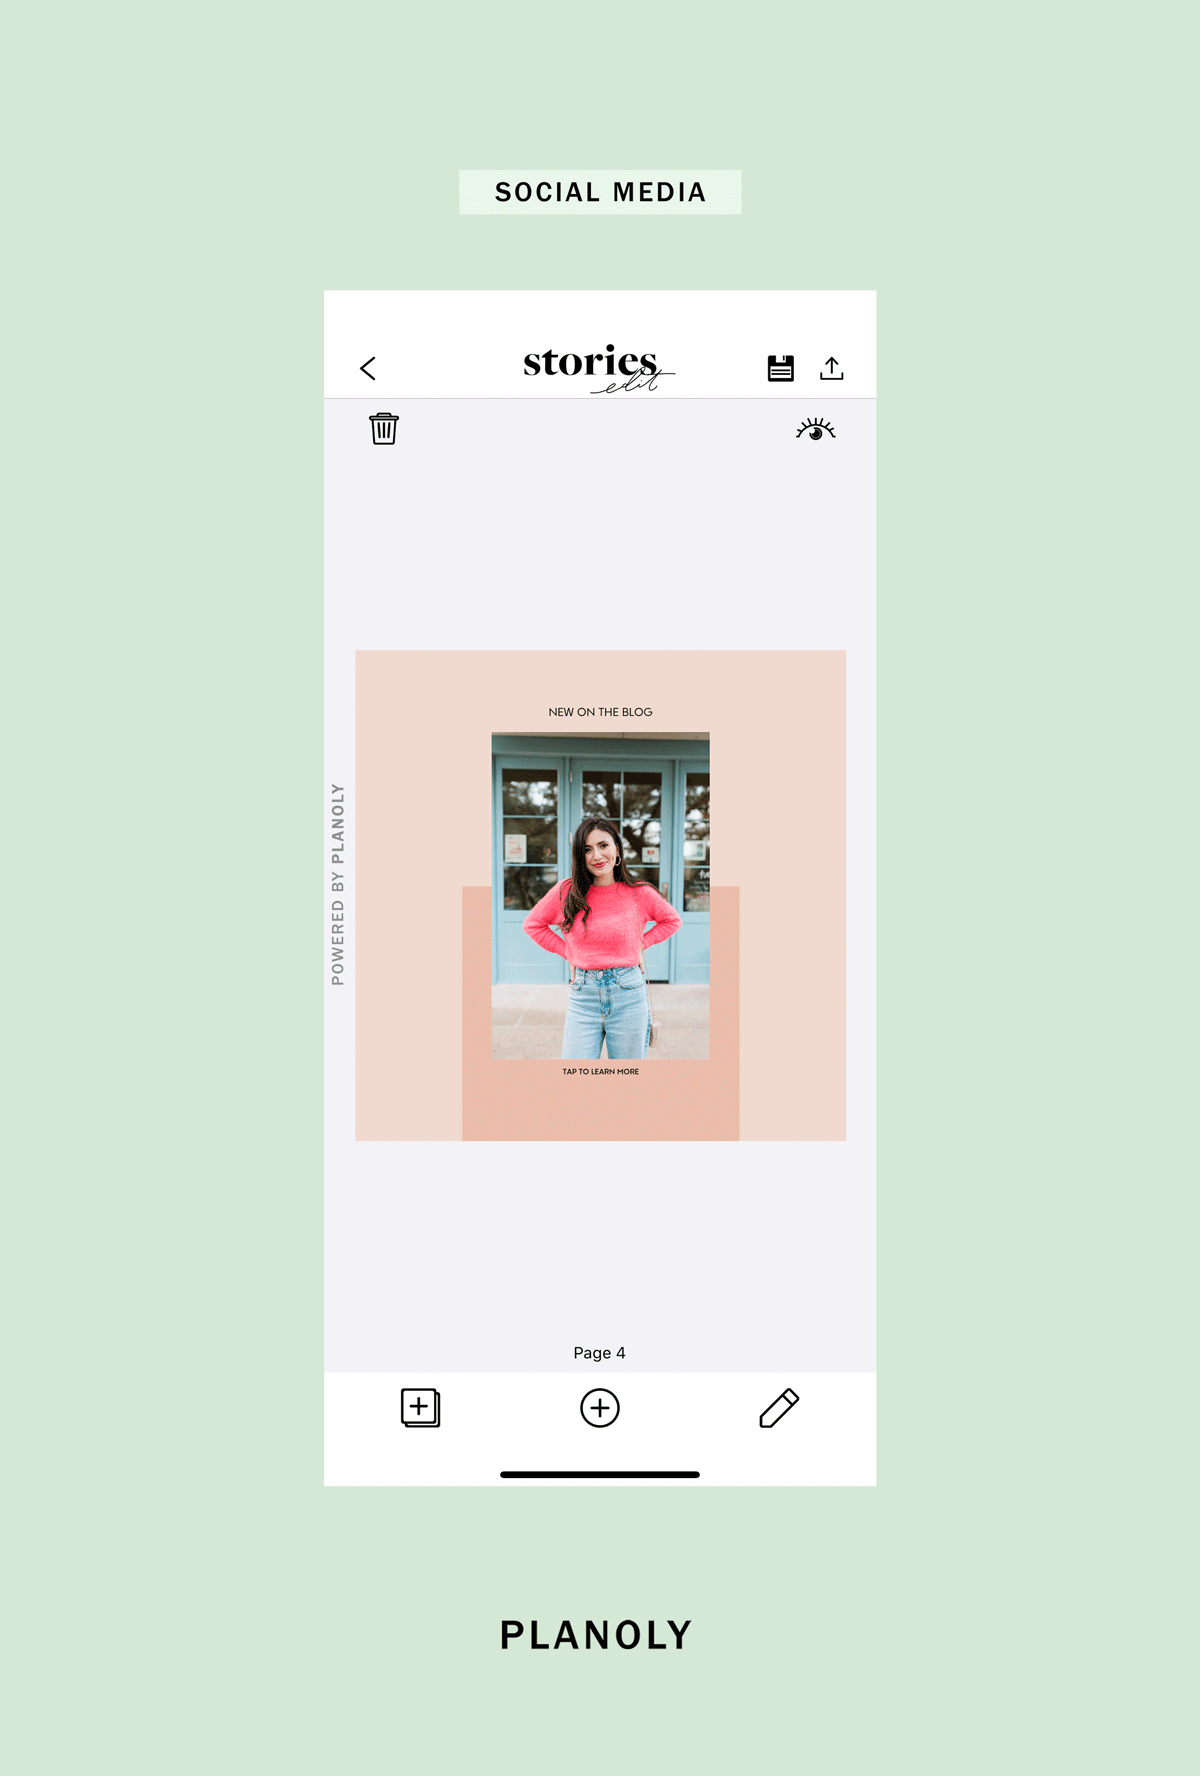 PLANOLY-Blog-Post-How-to-Use-the-Resizing,-Rotation,-and-Stickers-Features-on-StoriesEdit-Image-3-2-2